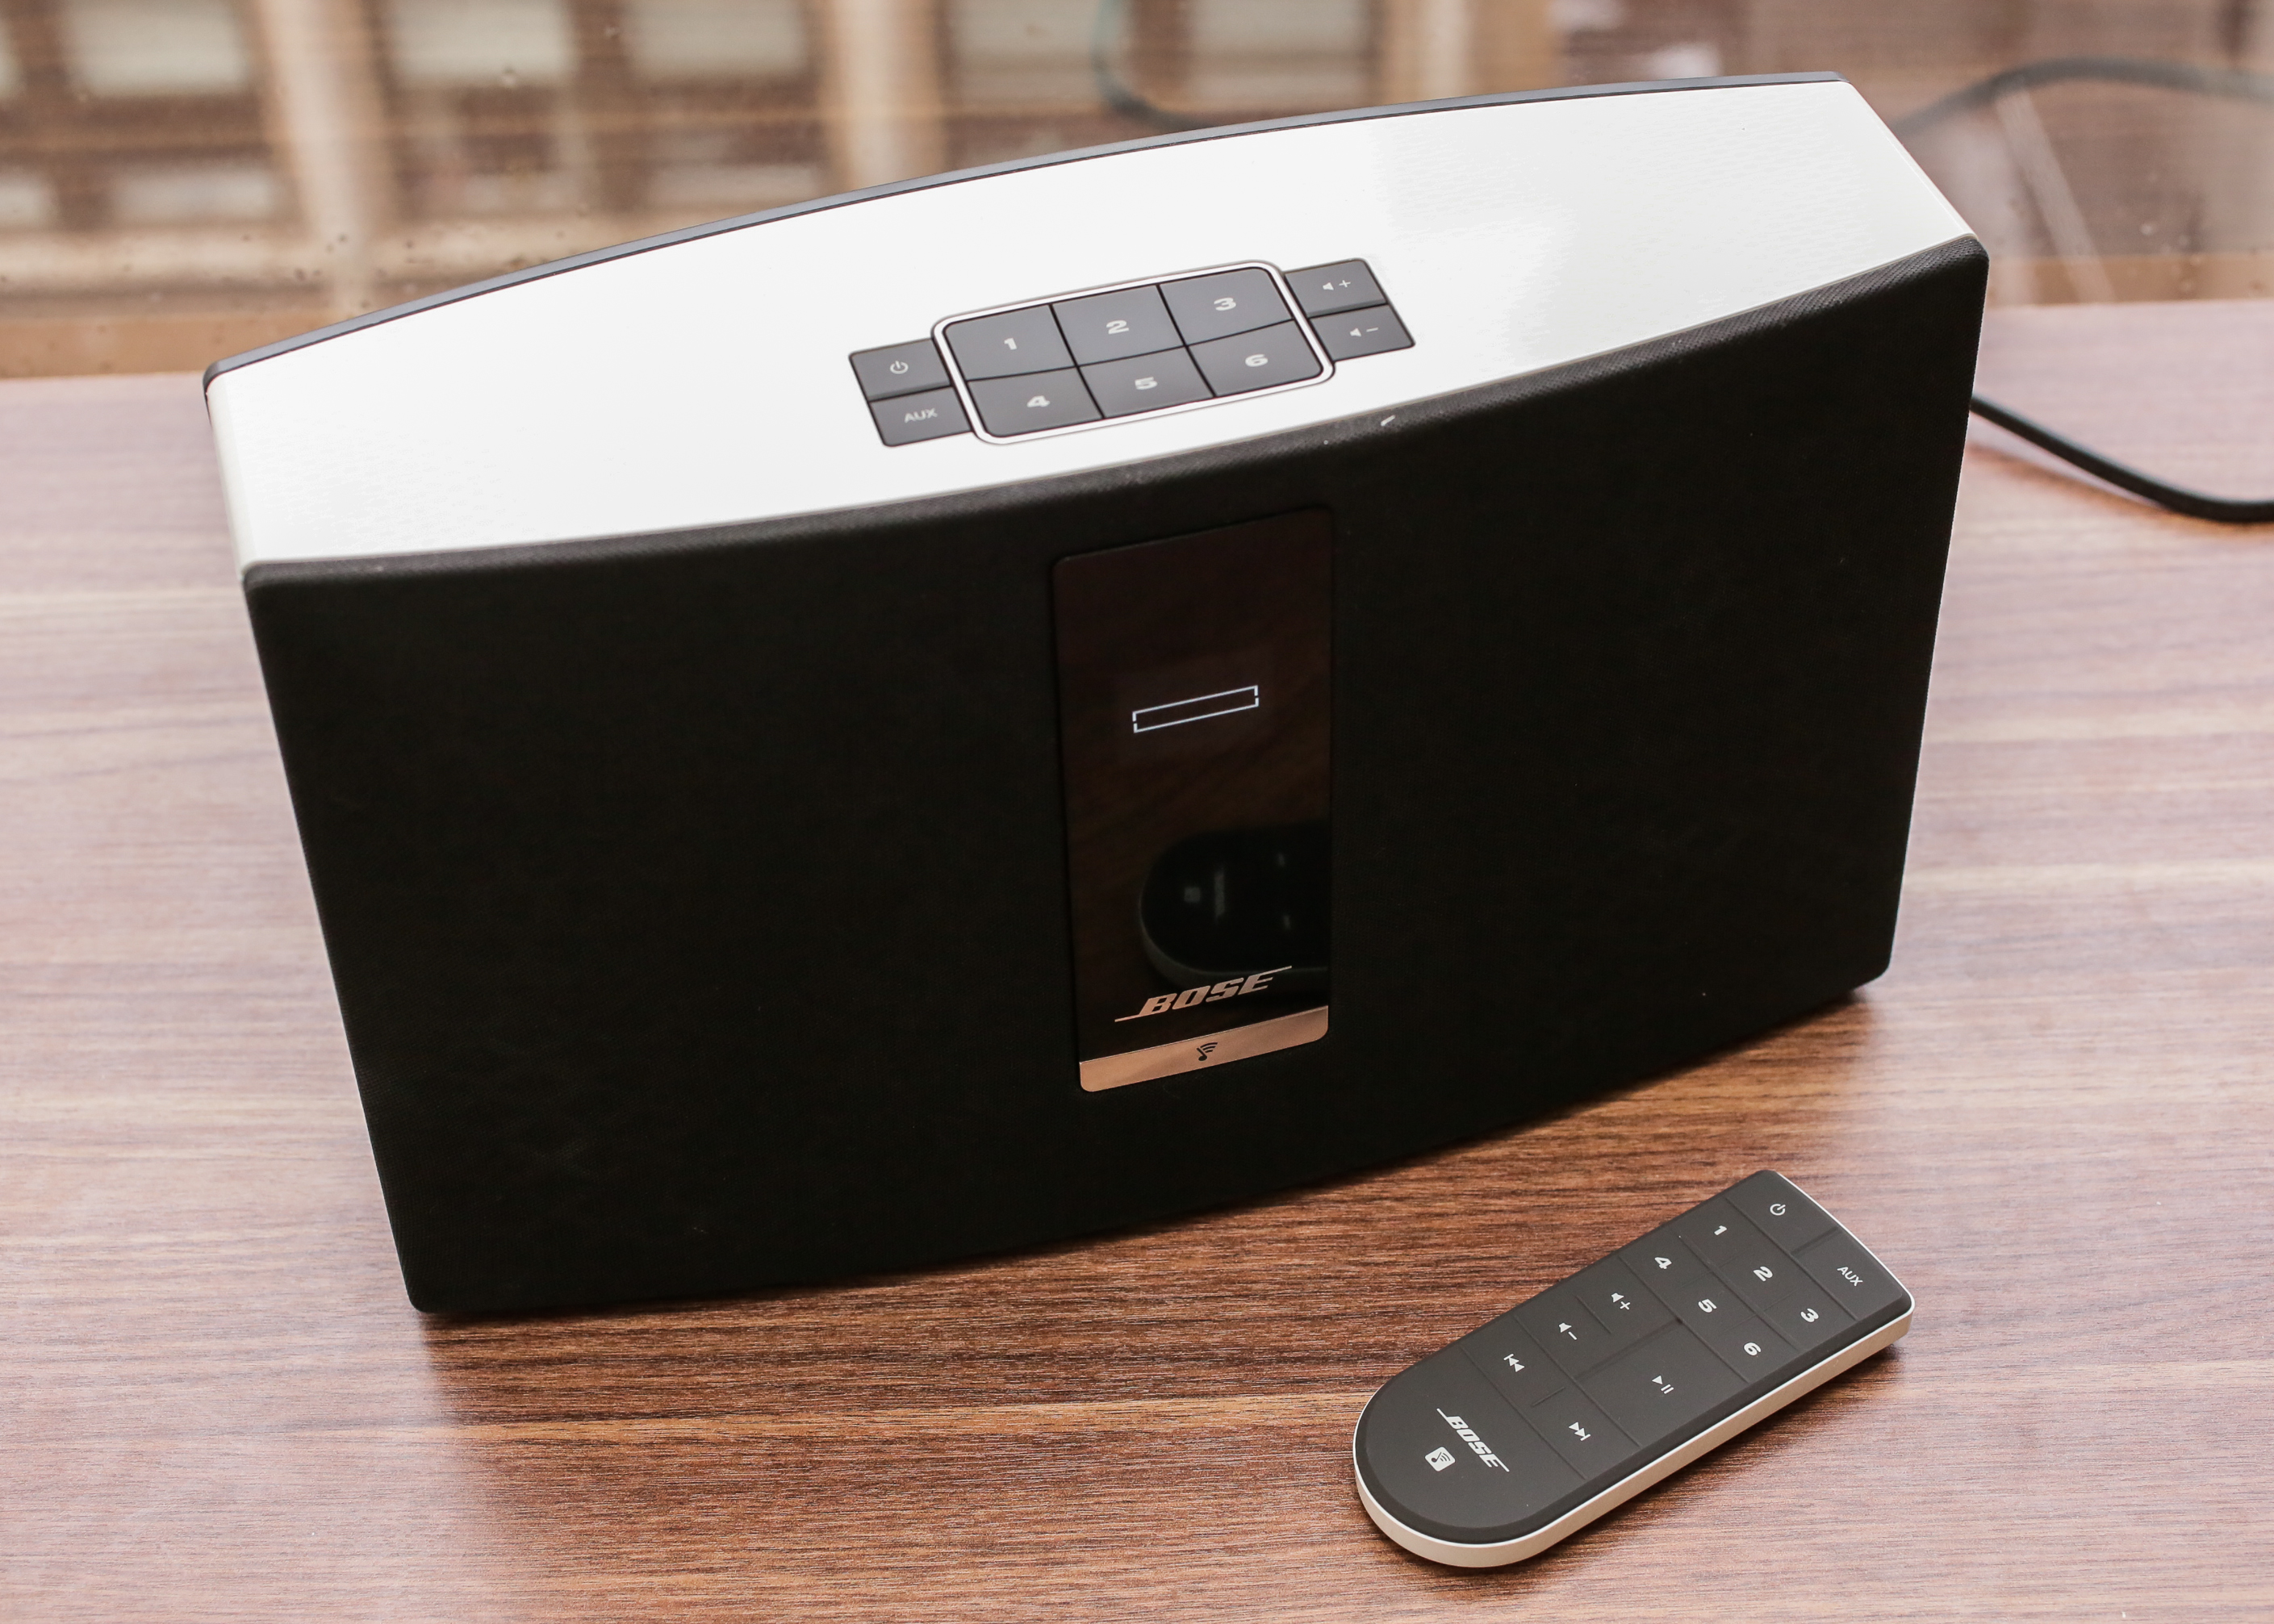 Bose SoundTouch 20 review: A polished wireless speaker that's rough the software edges - CNET